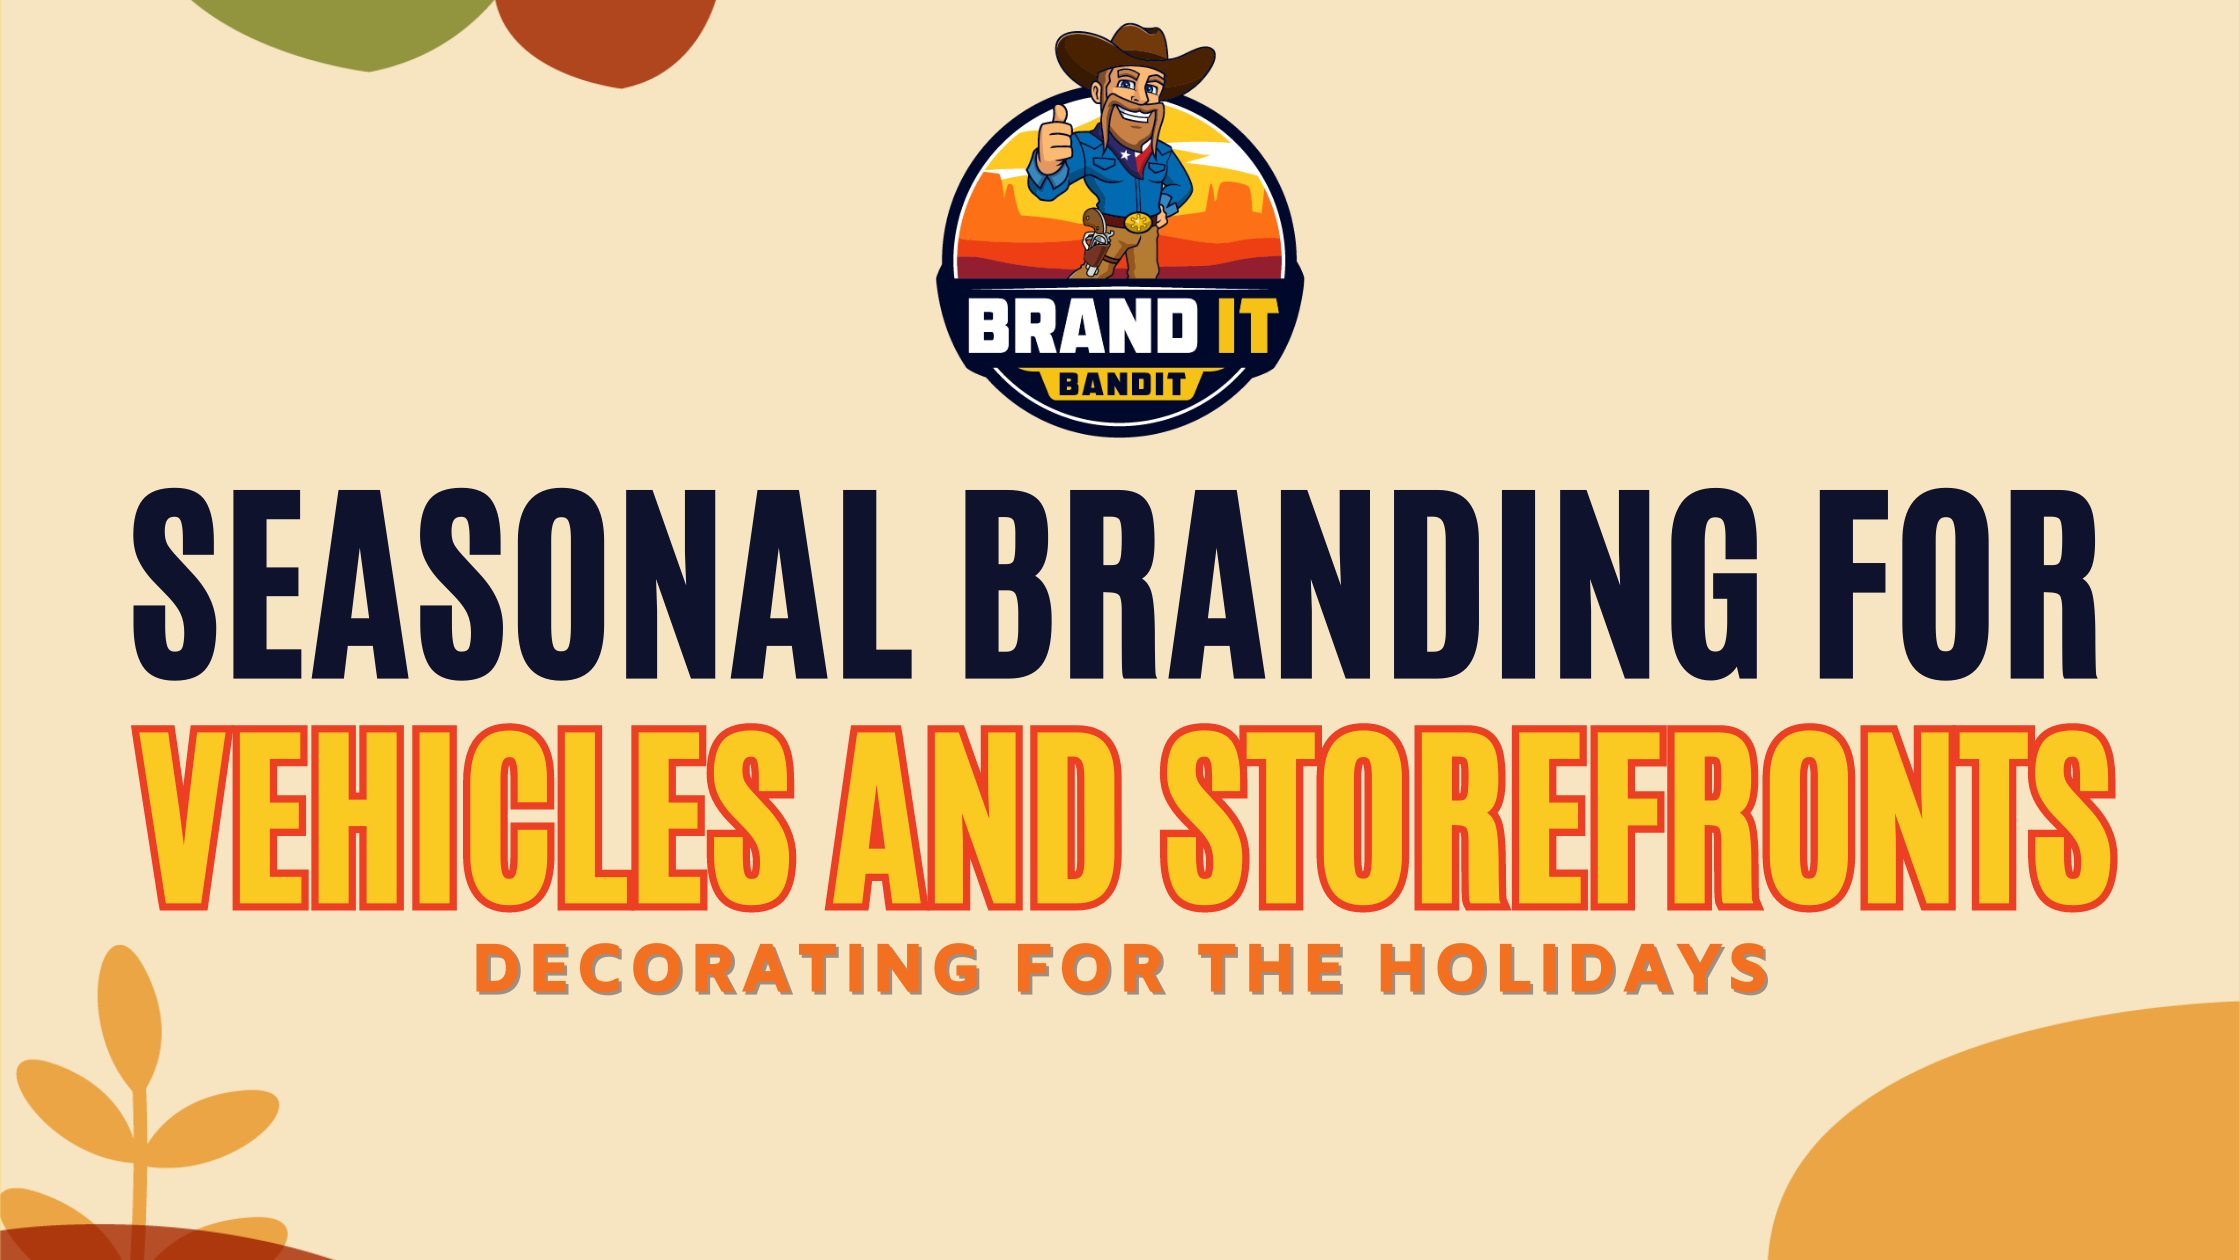 Seasonal Branding for Vehicles and Storefronts: Decorating for the Holidays